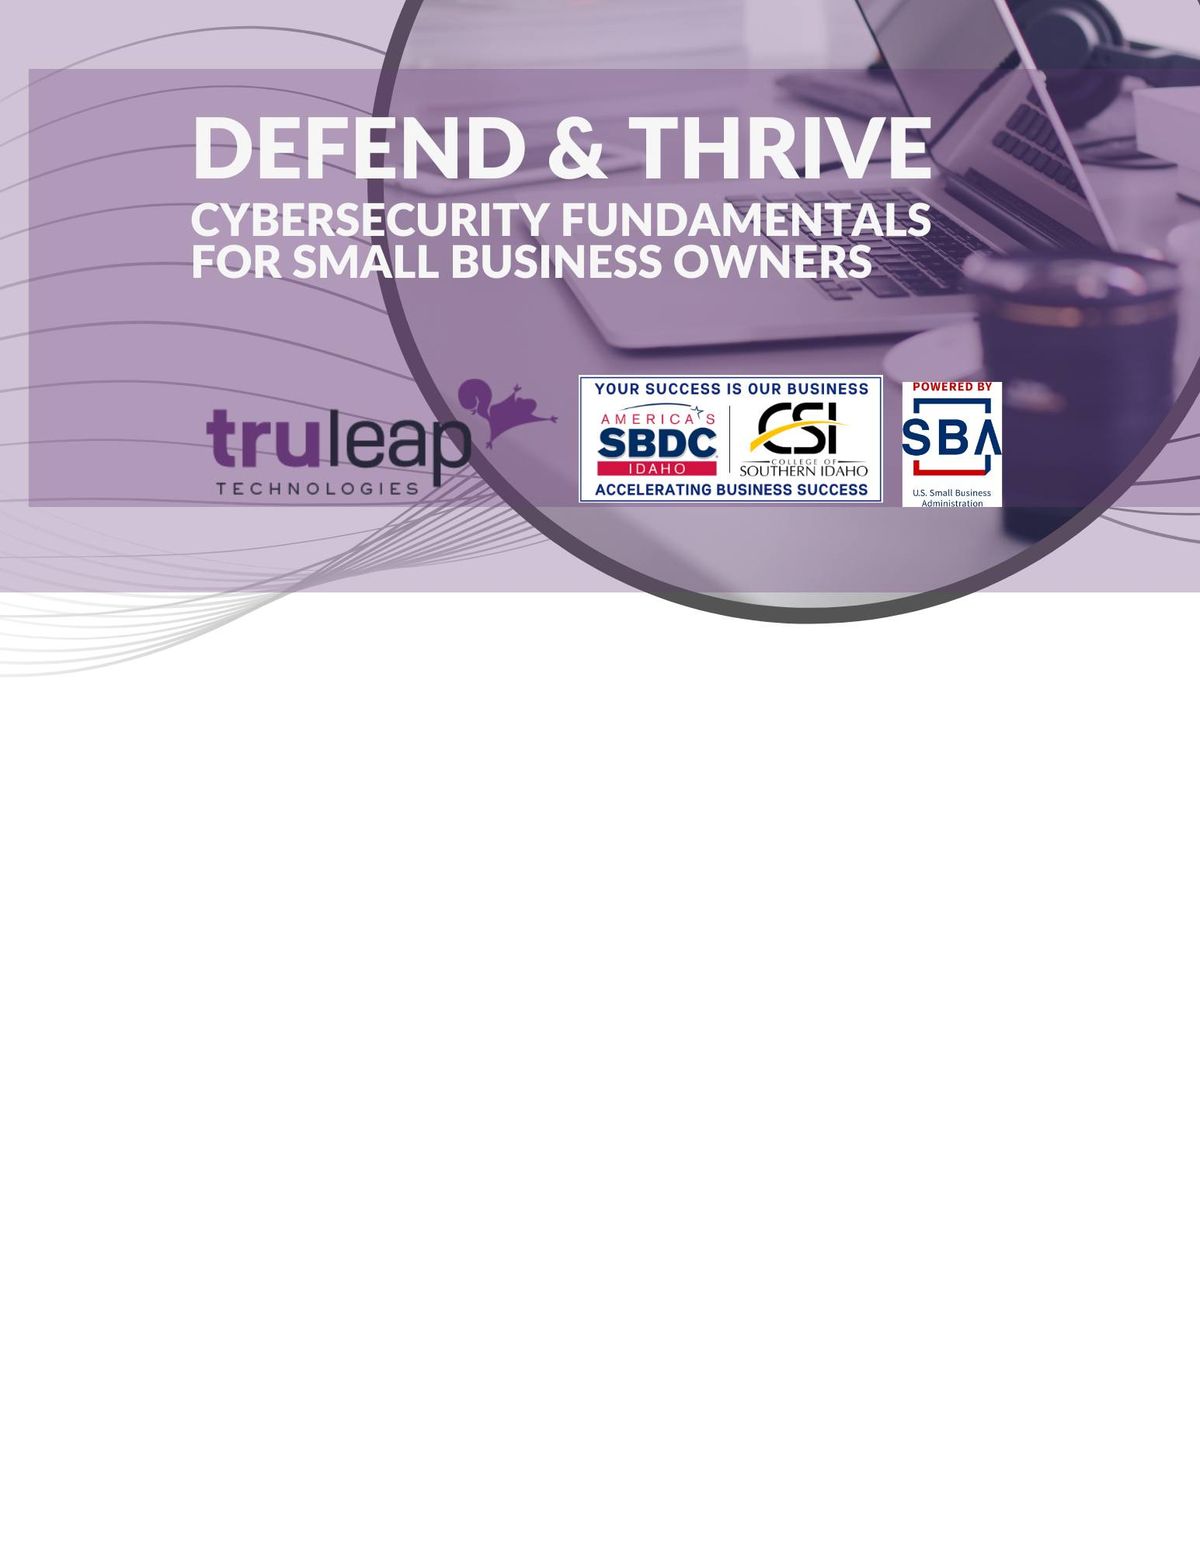 Defend & Thrive: Cybersecurity Fundamentals for Small Business Owners